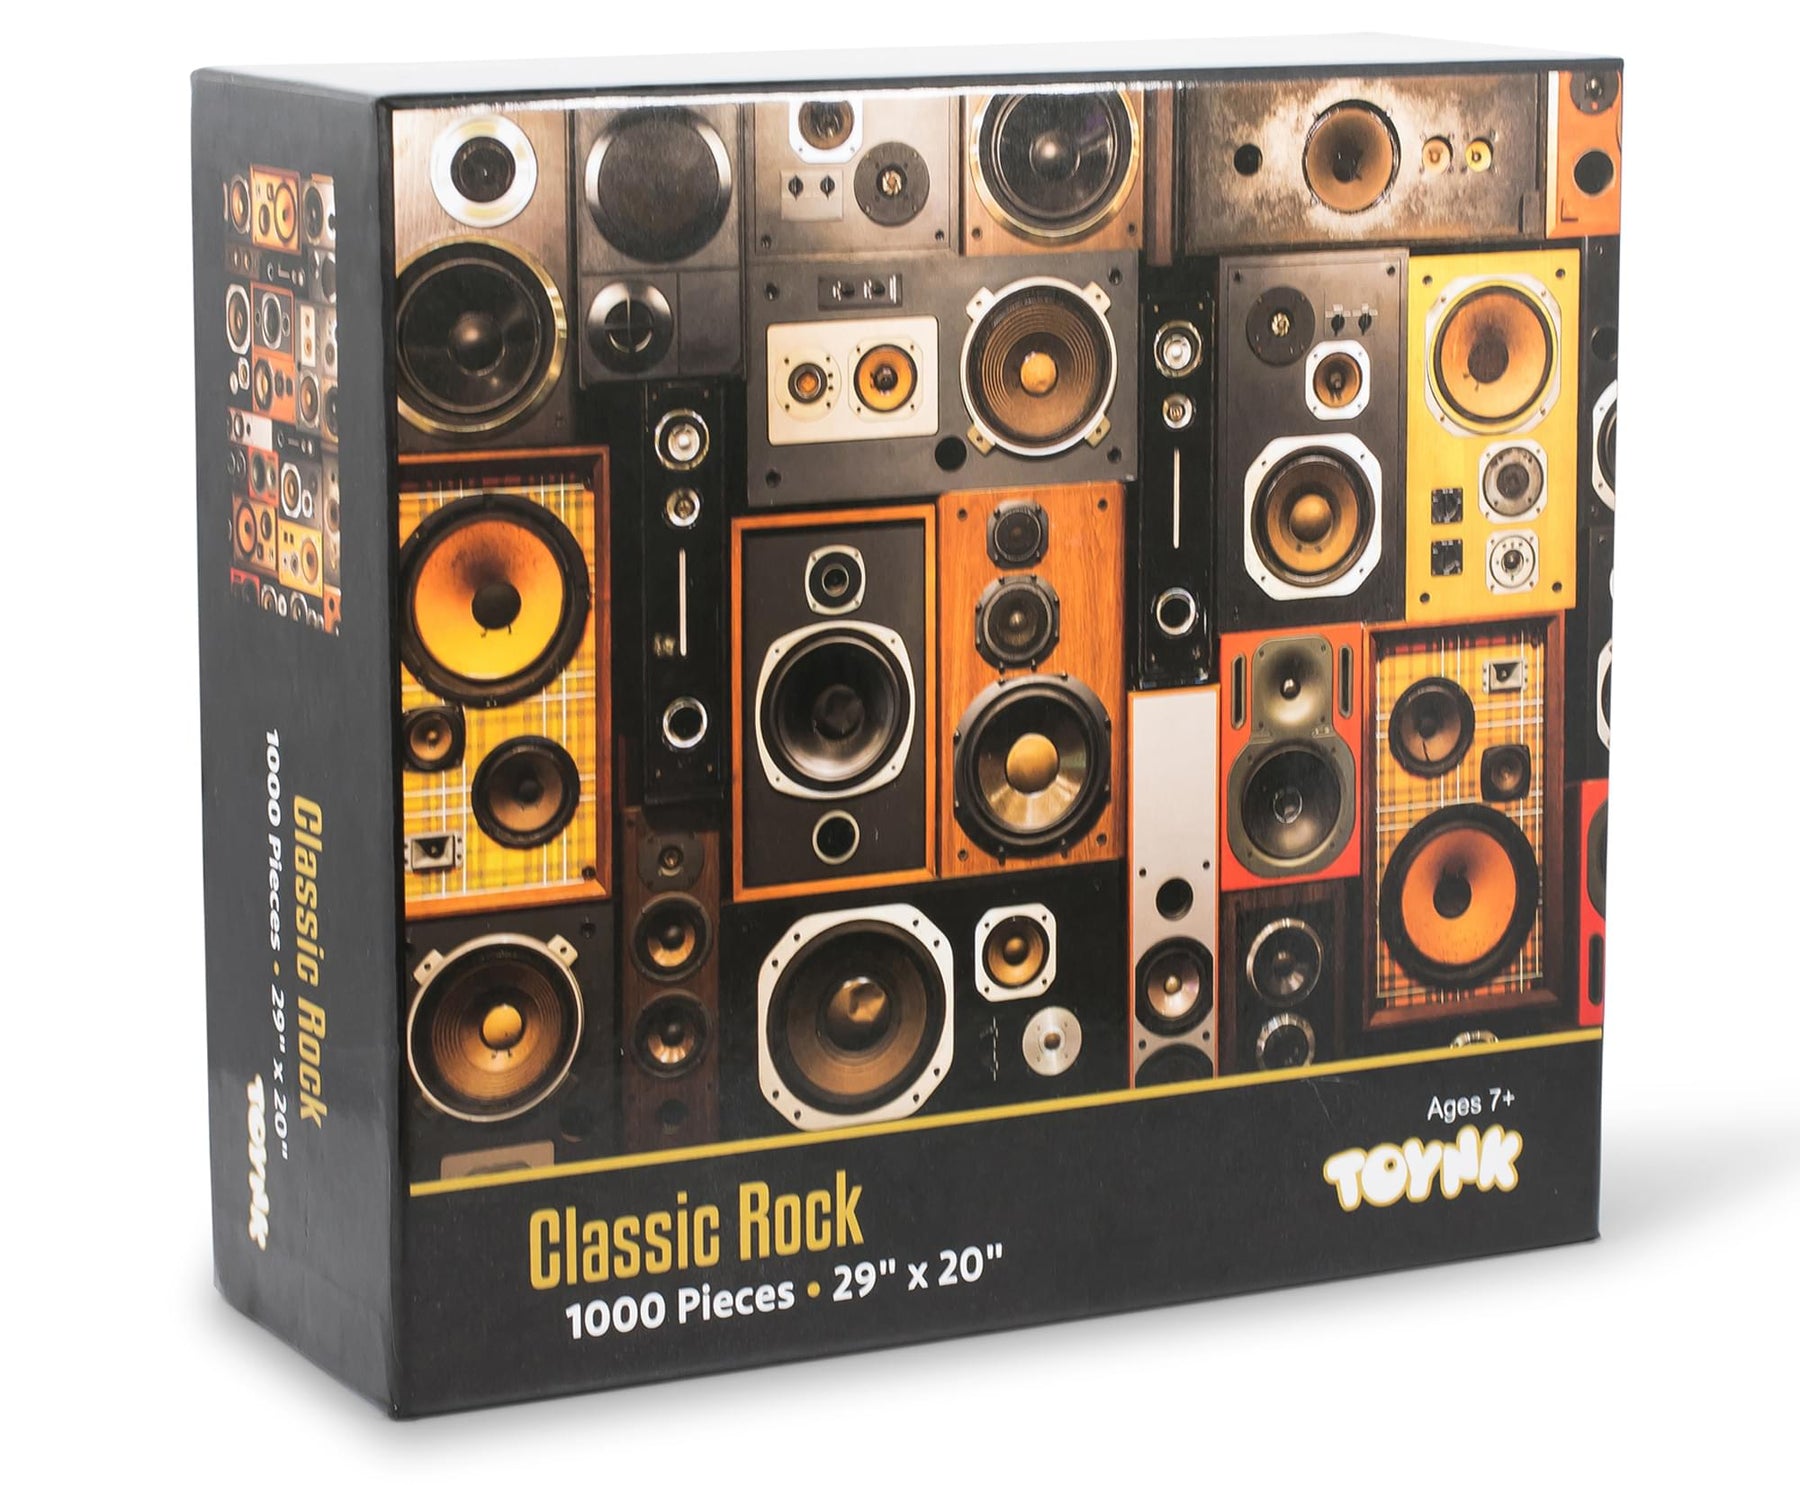 Classic Rock Music Surround Sound Systems 1000 Piece Jigsaw Puzzle